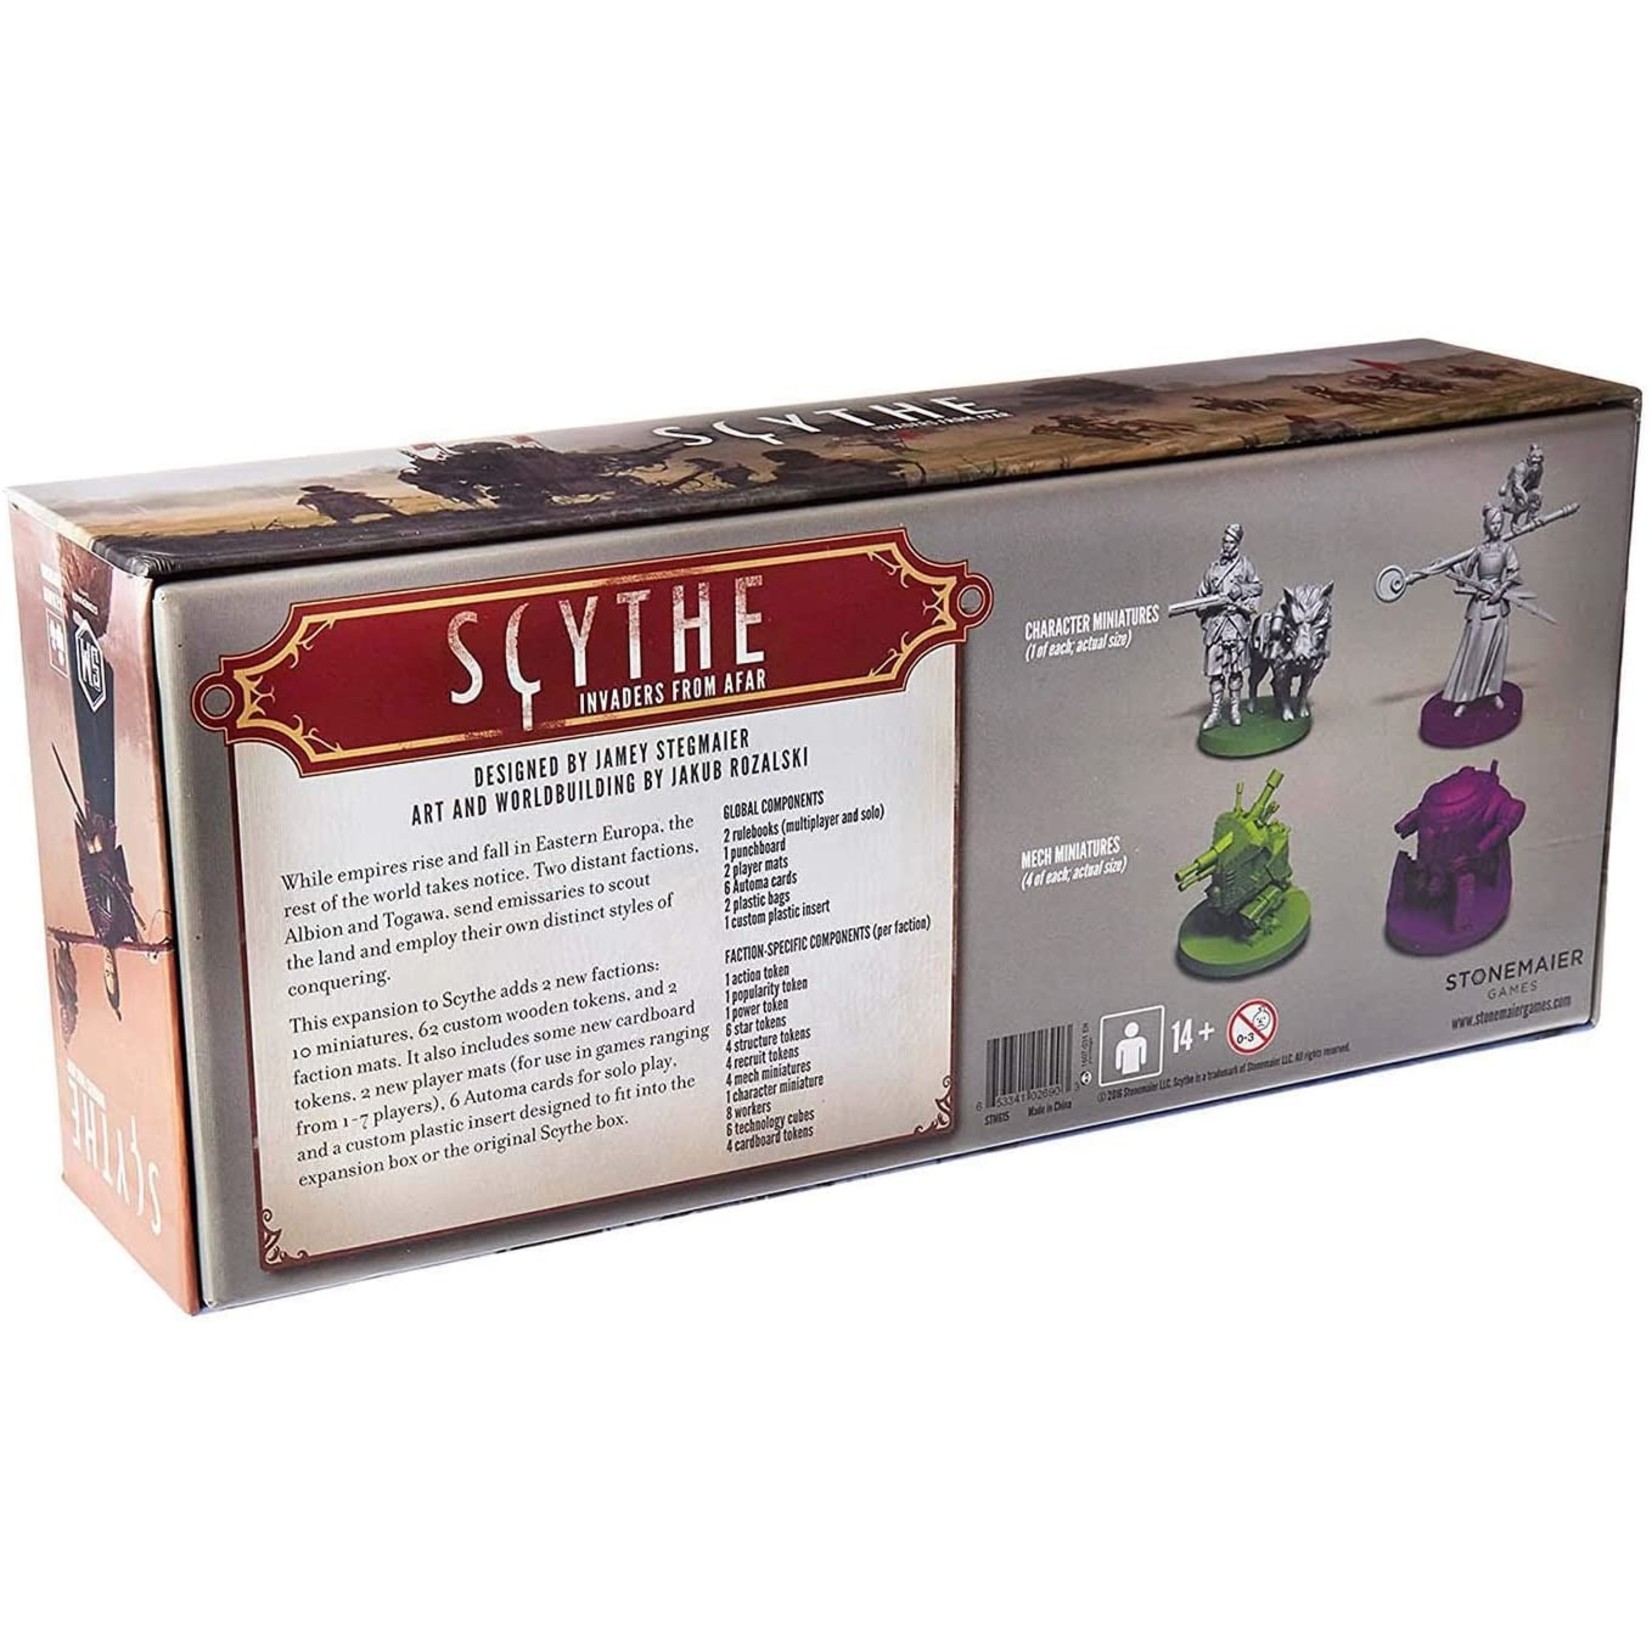 Scythe: Invaders from Afar Retail Edition Board Game Expansion